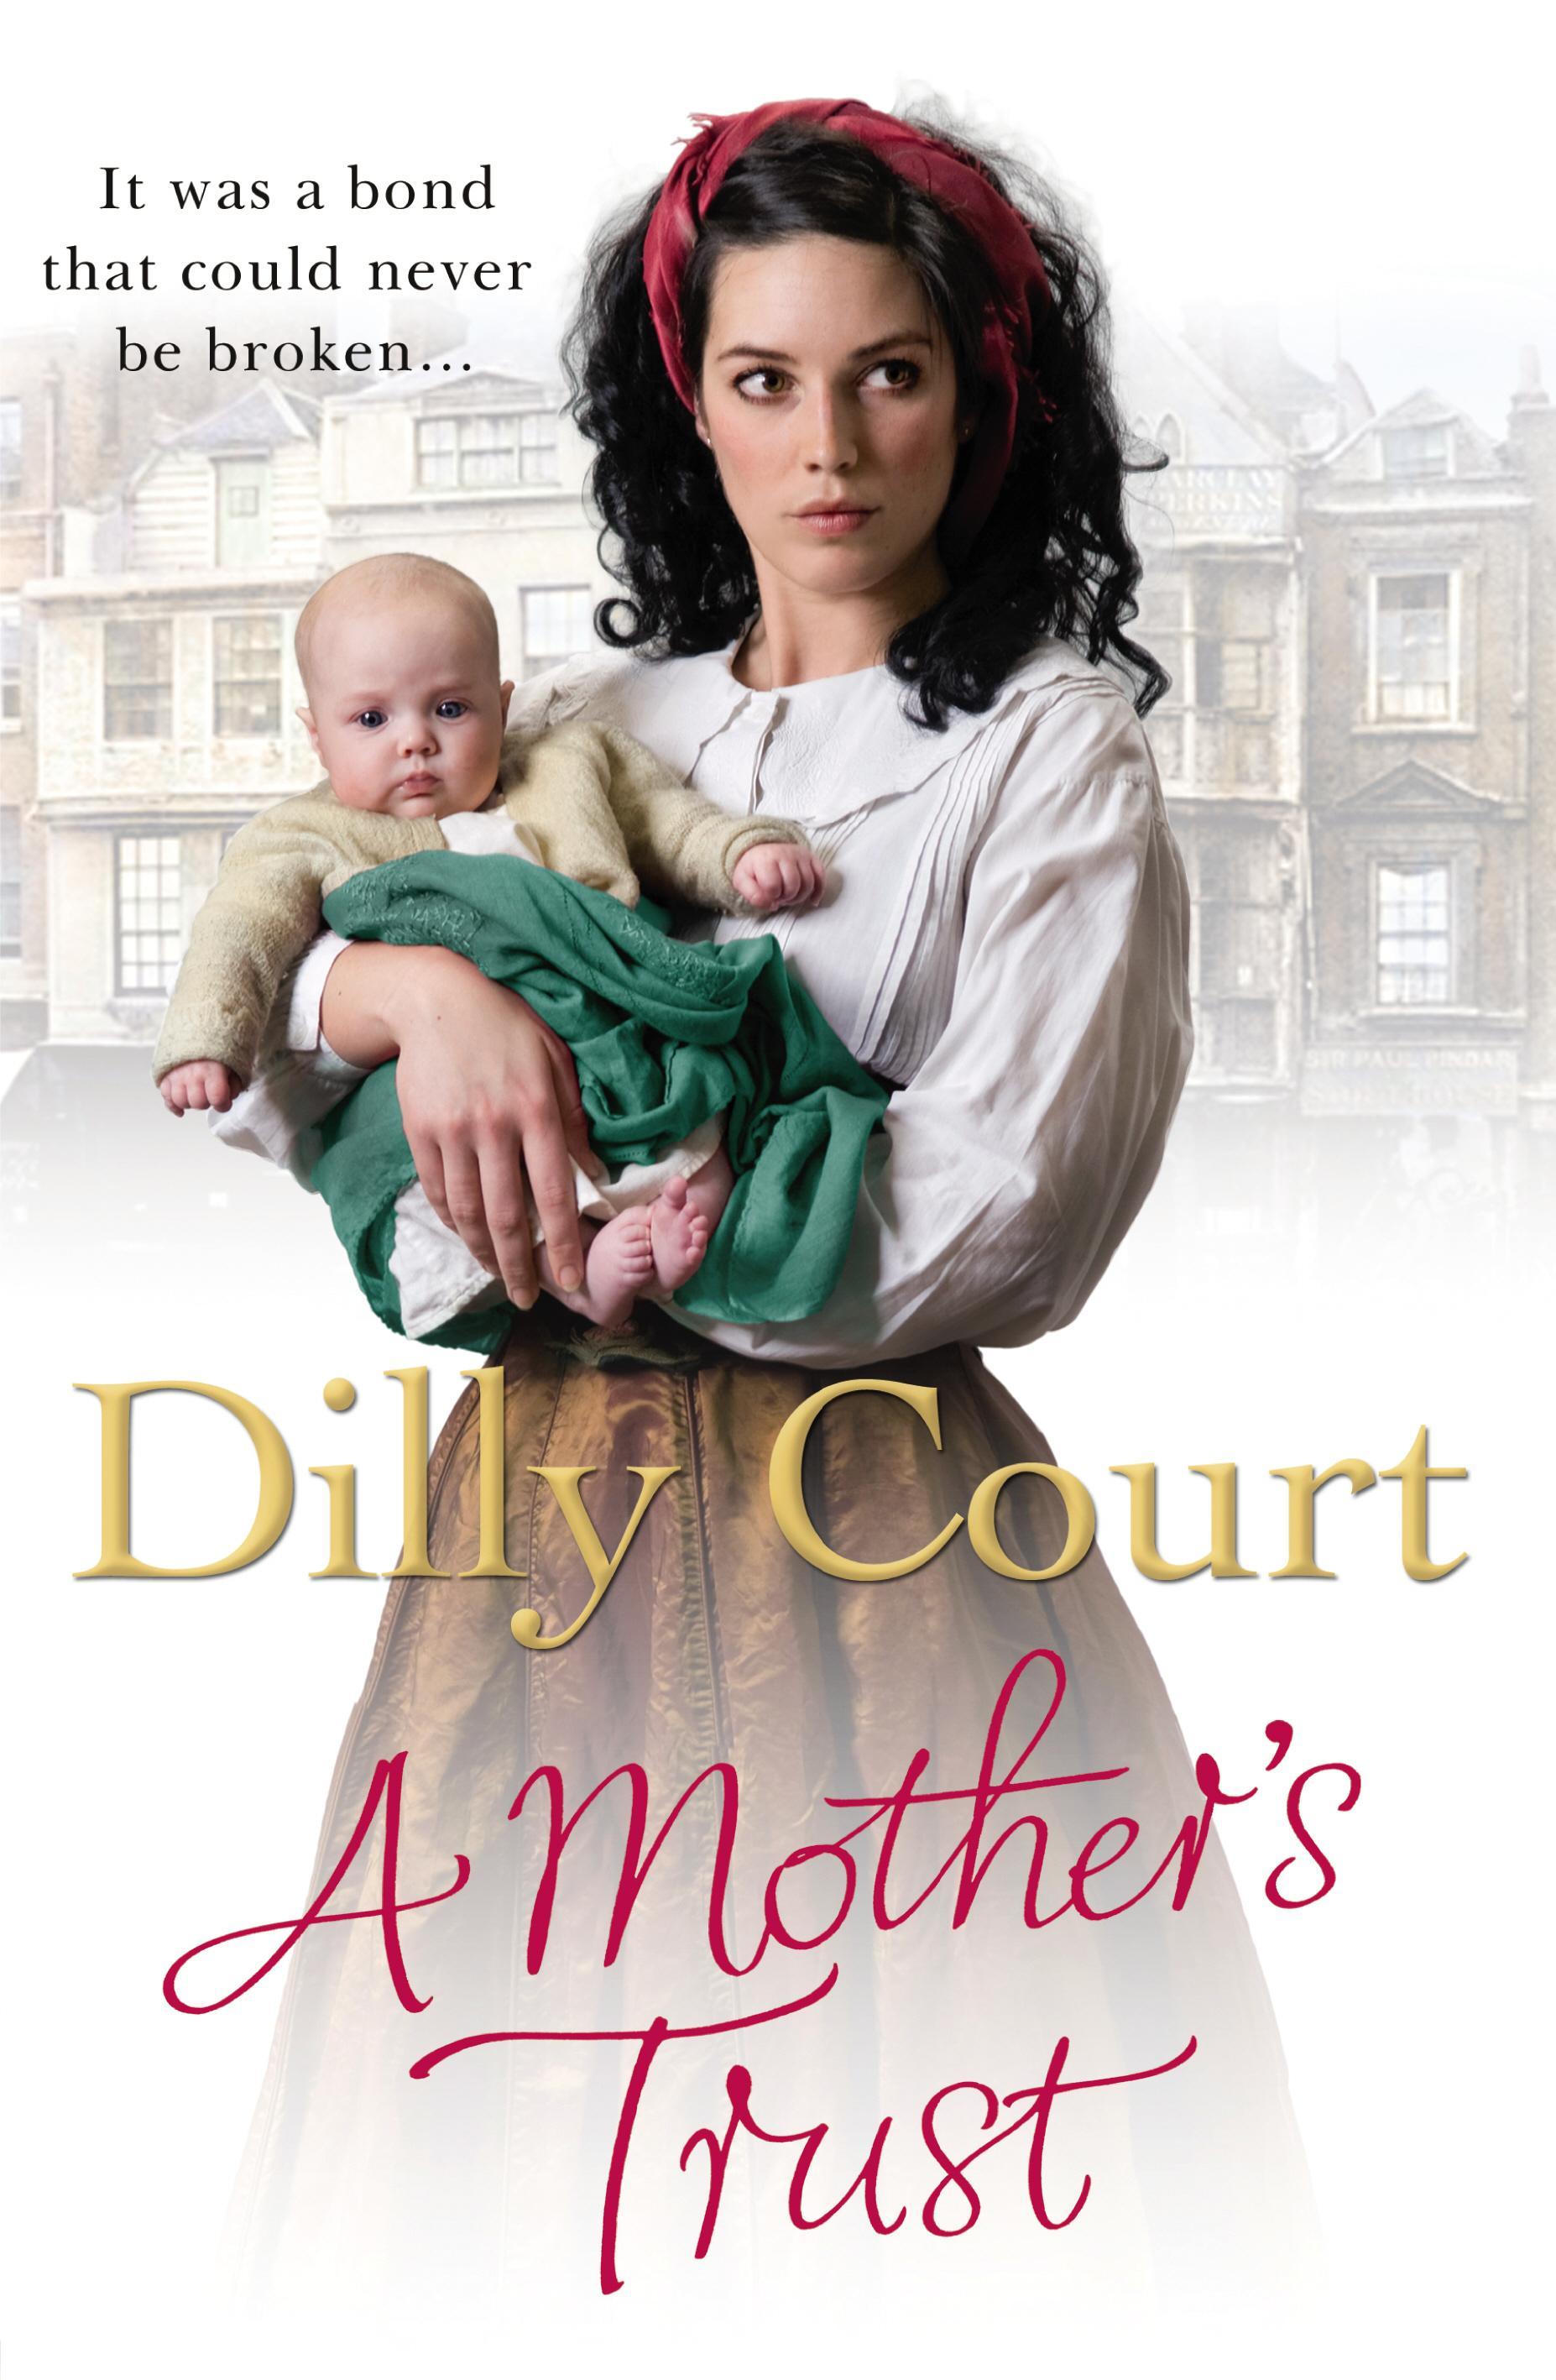 Mother's Trust - Dilly Court